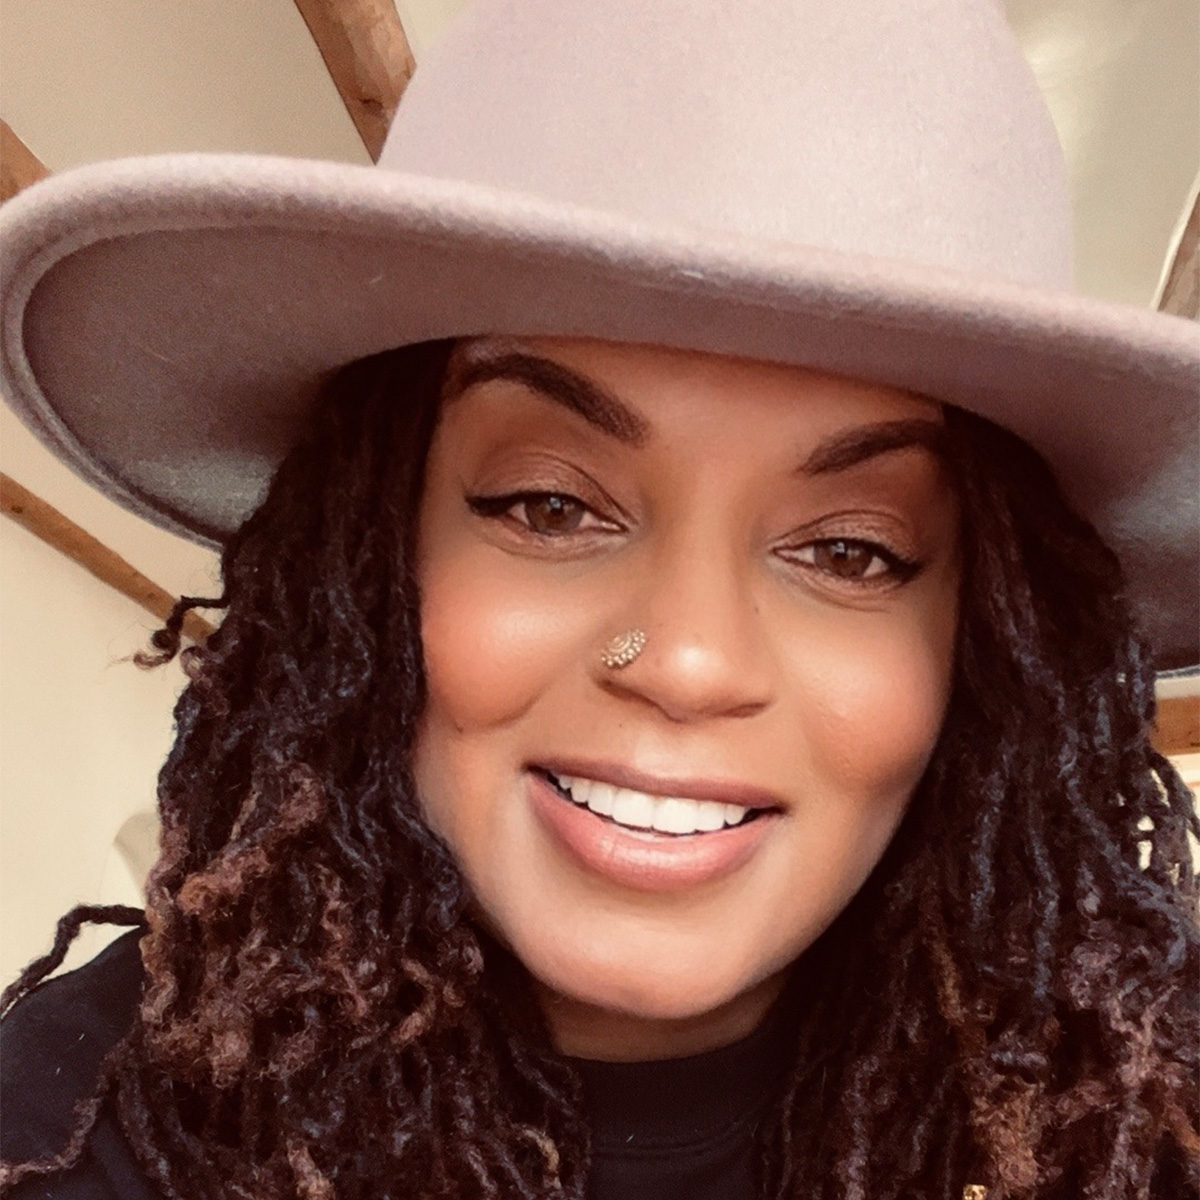 Camara Meri Rajaberi is Great Great Great+ Granddaughter of enslaved Africans and African Freedmen of the Muskogee (Creek) Nation. She is wearing a large brim, tan-colored hat, has dark-brown, medium length twisted/curled hair and is smiling.